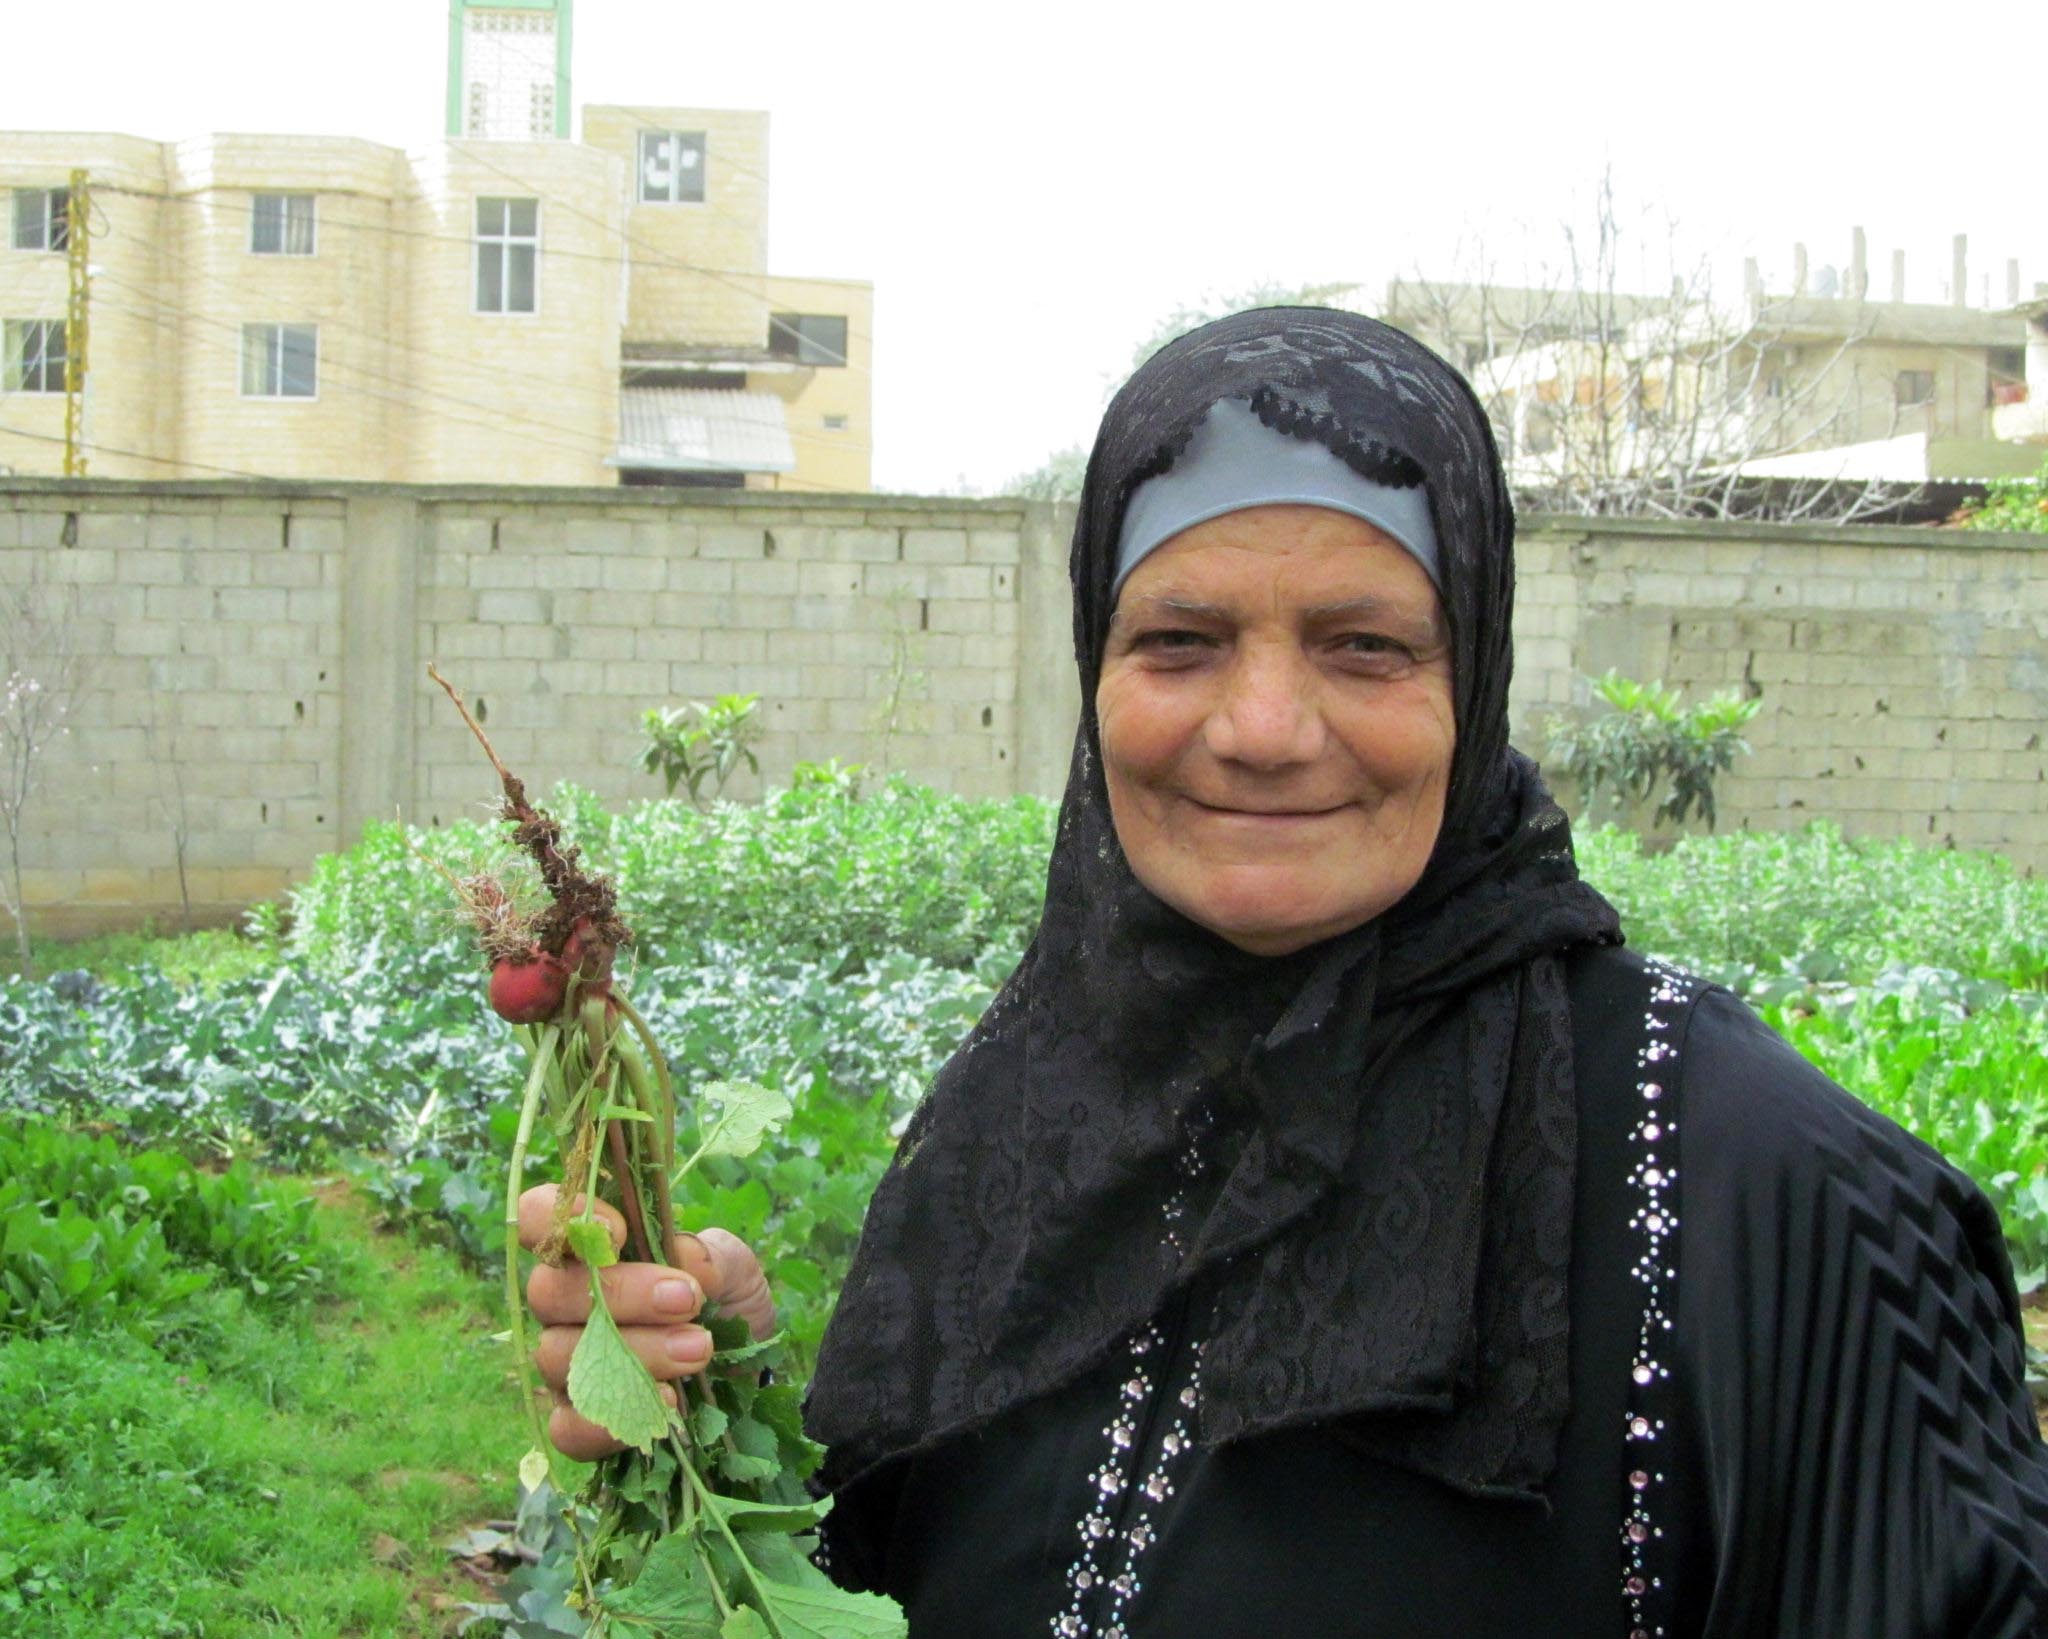 Sobheya holds up her radishes that she carefully cultivated in the garden Anera installed in her Nahr El Bared community.